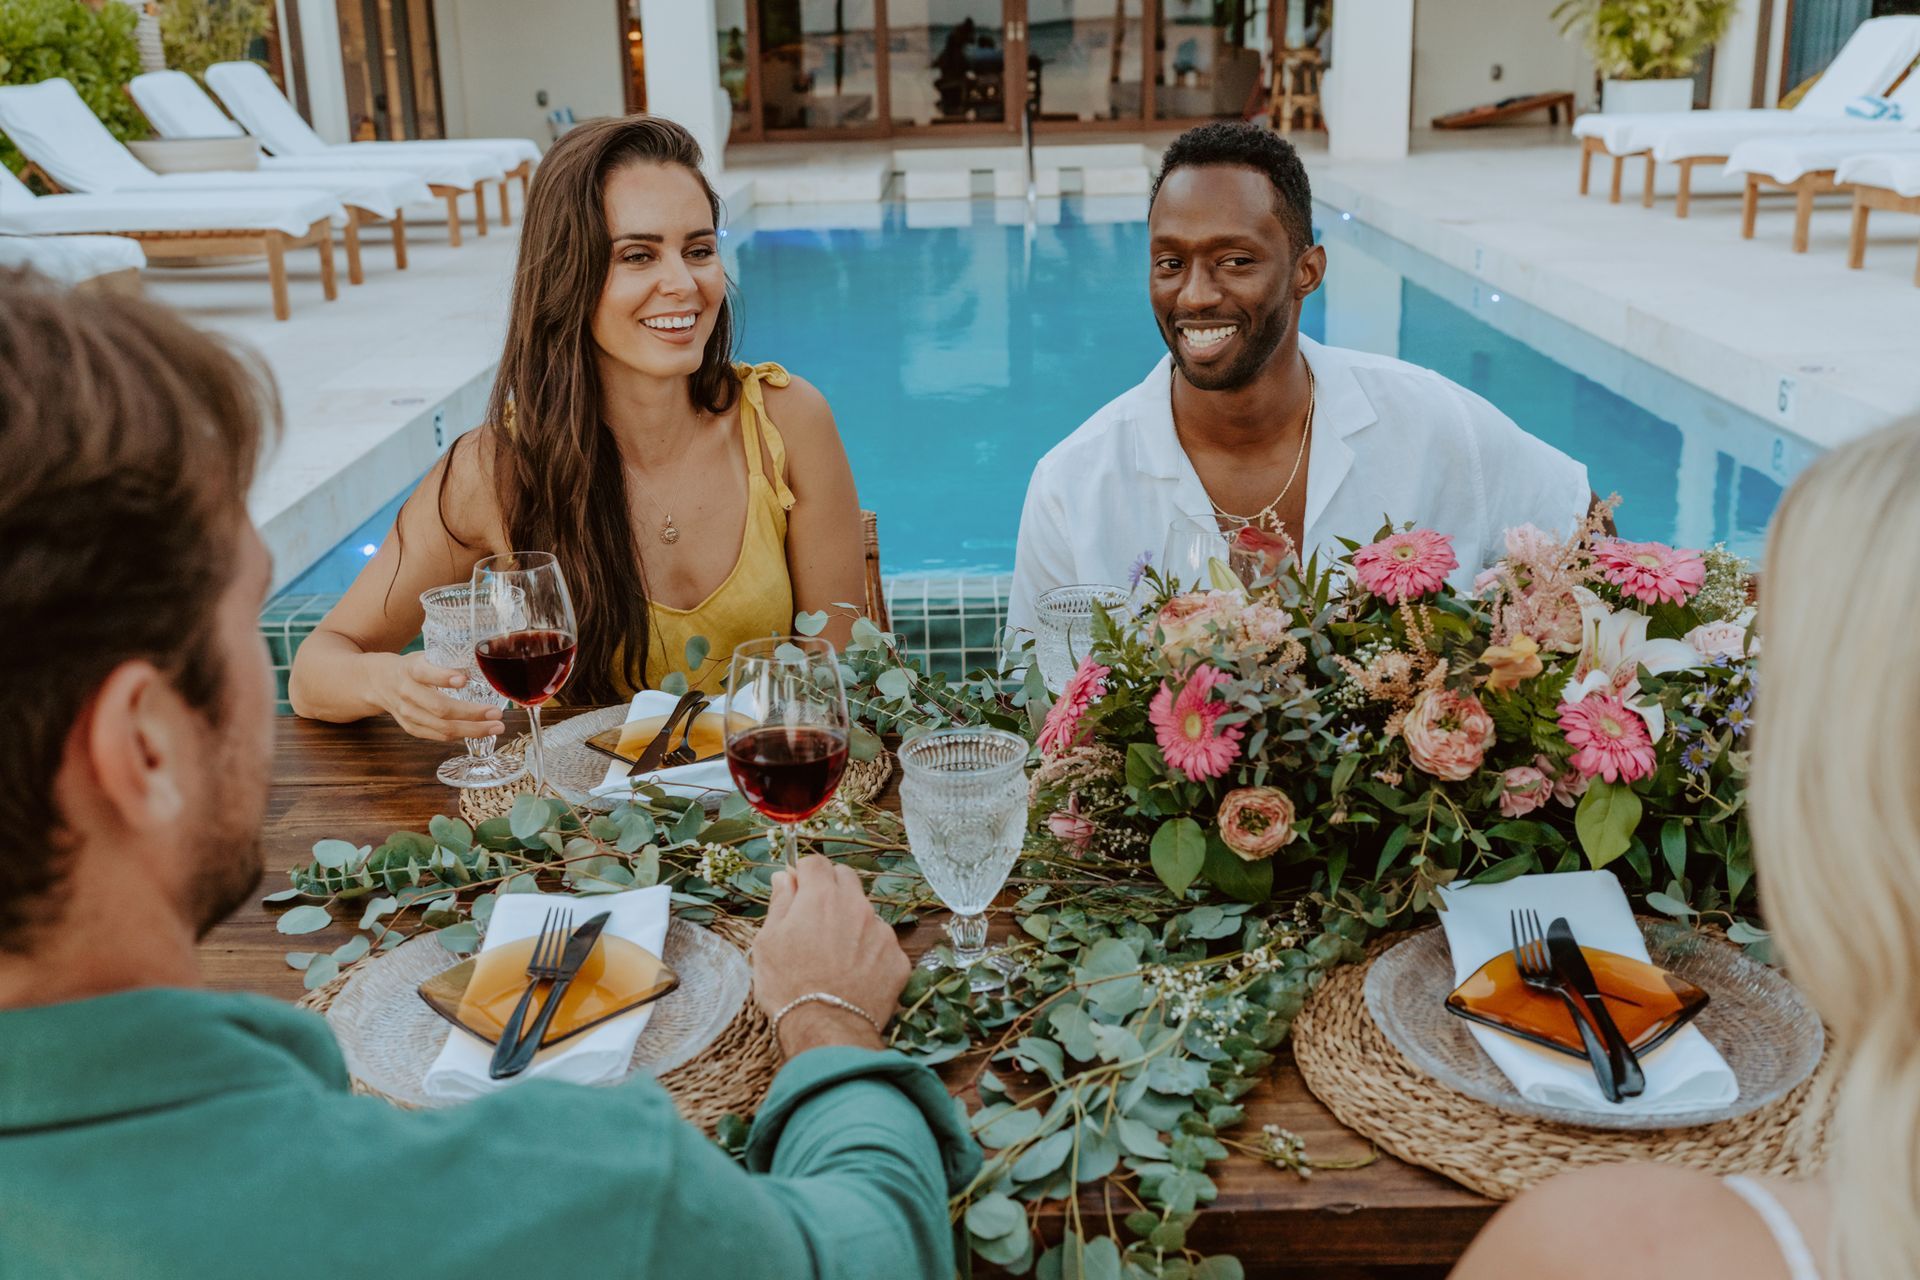 a group of people are sitting at a table in front of a swimming pool